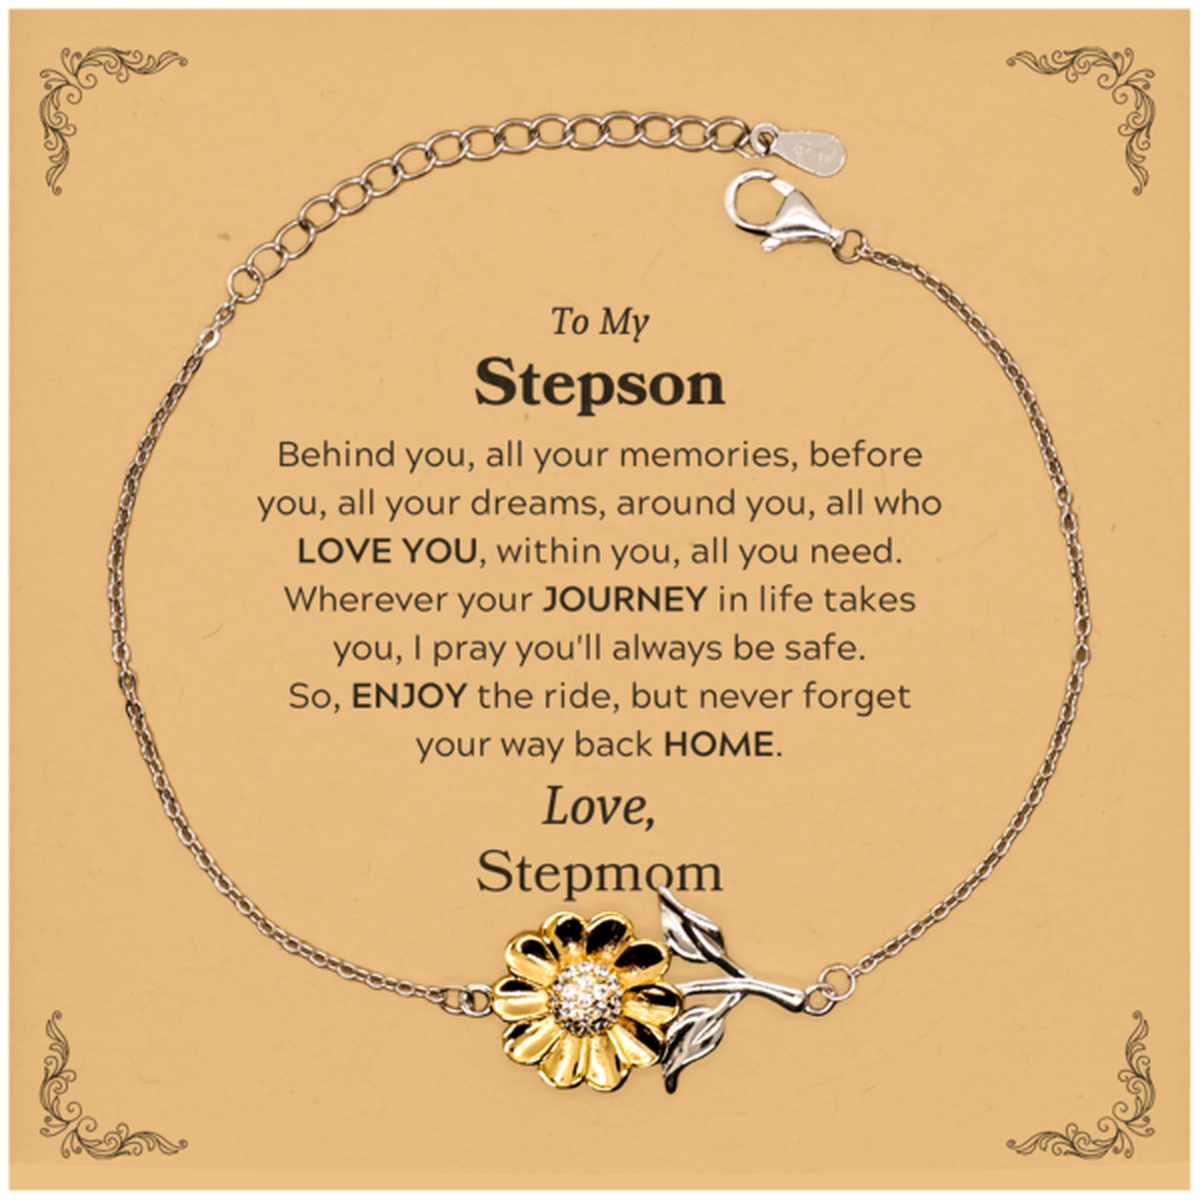 To My Stepson Graduation Gifts from Stepmom, Stepson Sunflower Bracelet Christmas Birthday Gifts for Stepson Behind you, all your memories, before you, all your dreams. Love, Stepmom